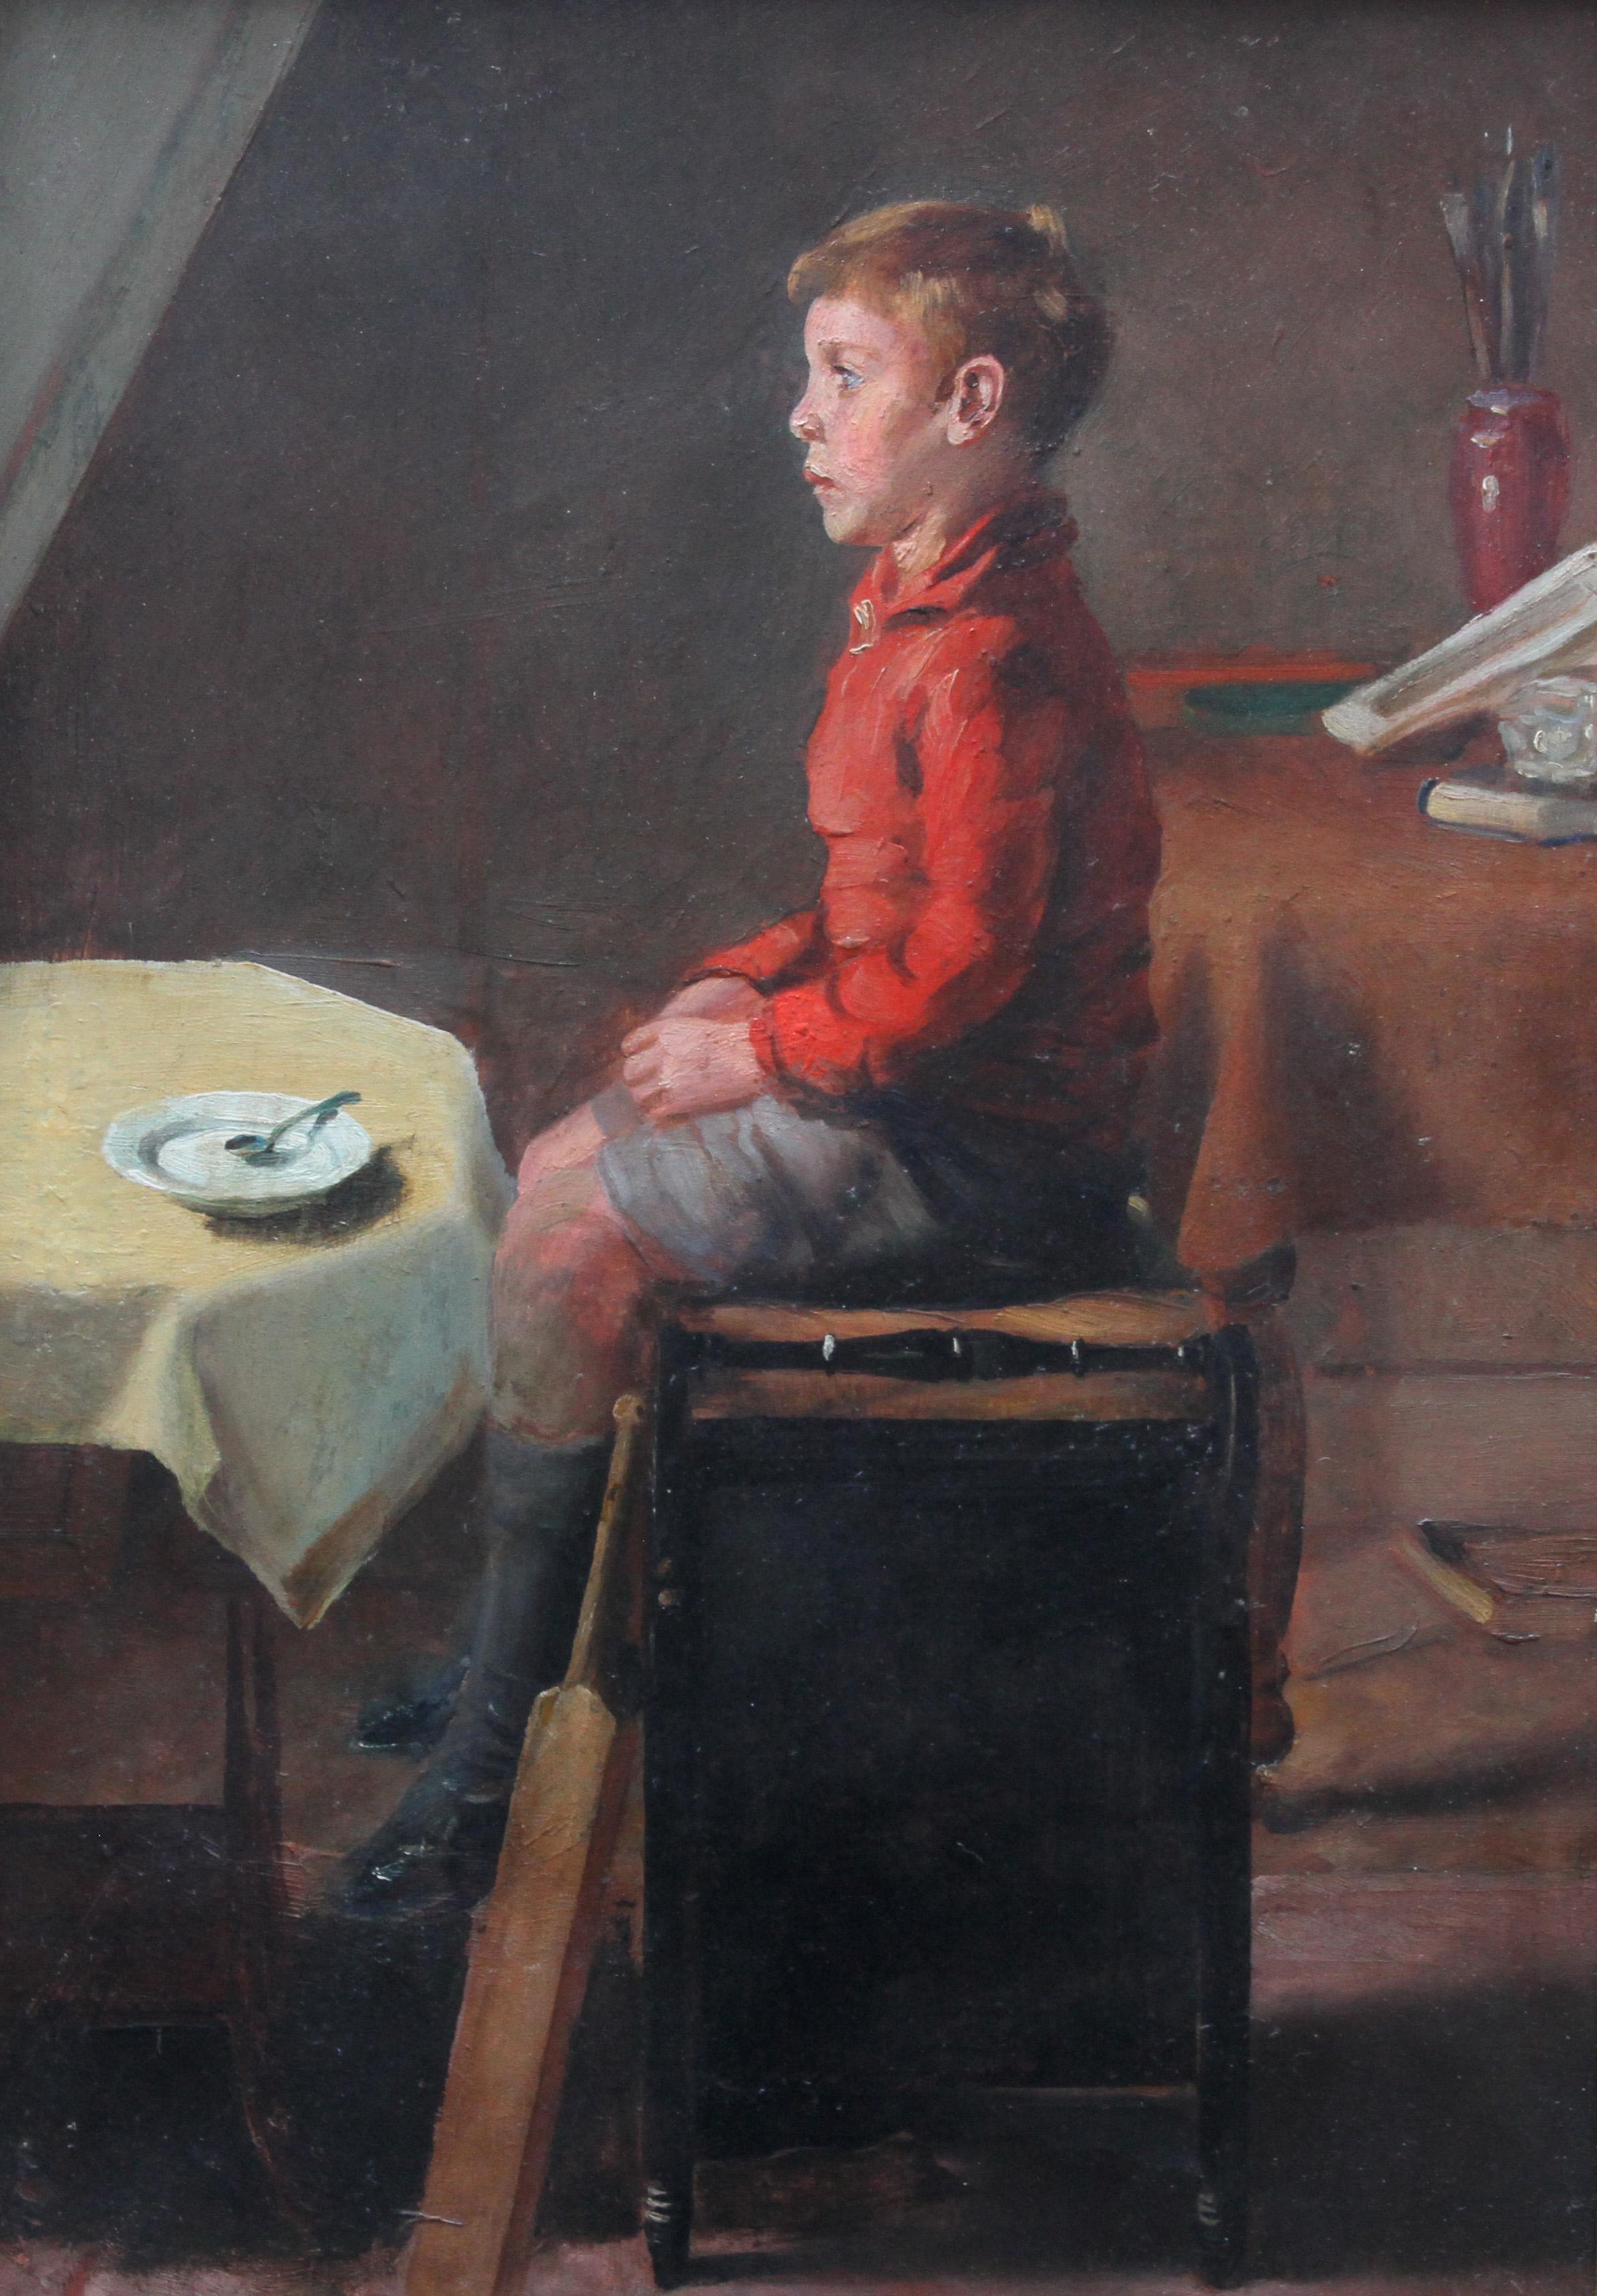 Schoolboy with Cricket Bat - British Slade School art 30's portrait oil painting - Painting by Unknown